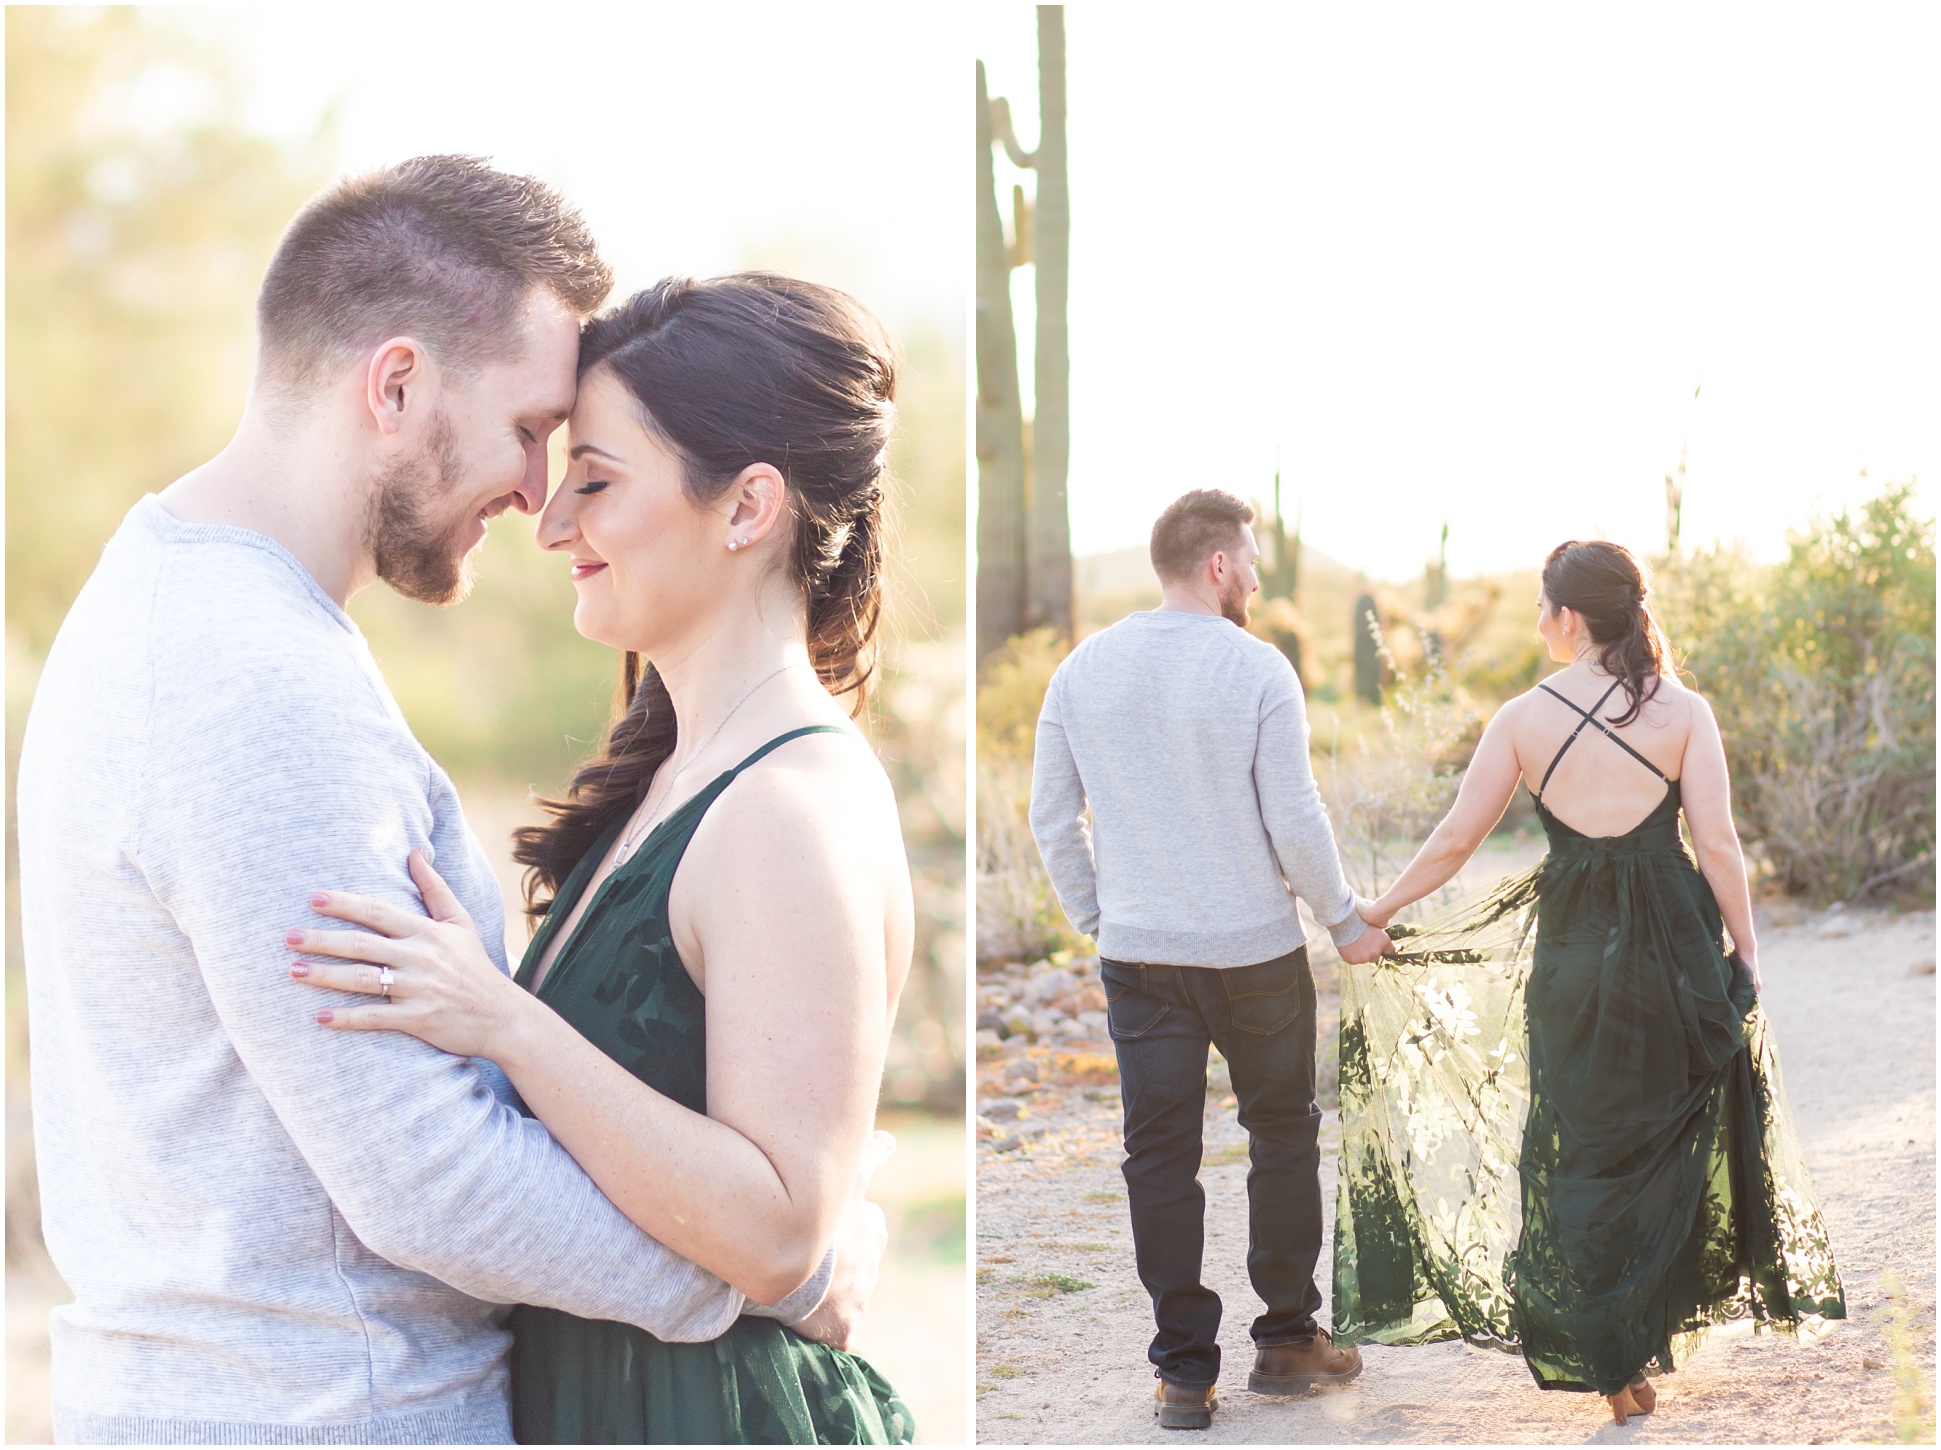 Left Image: Jake and Kaila nose to nose, right image: Jake and Kaila walking away from camera